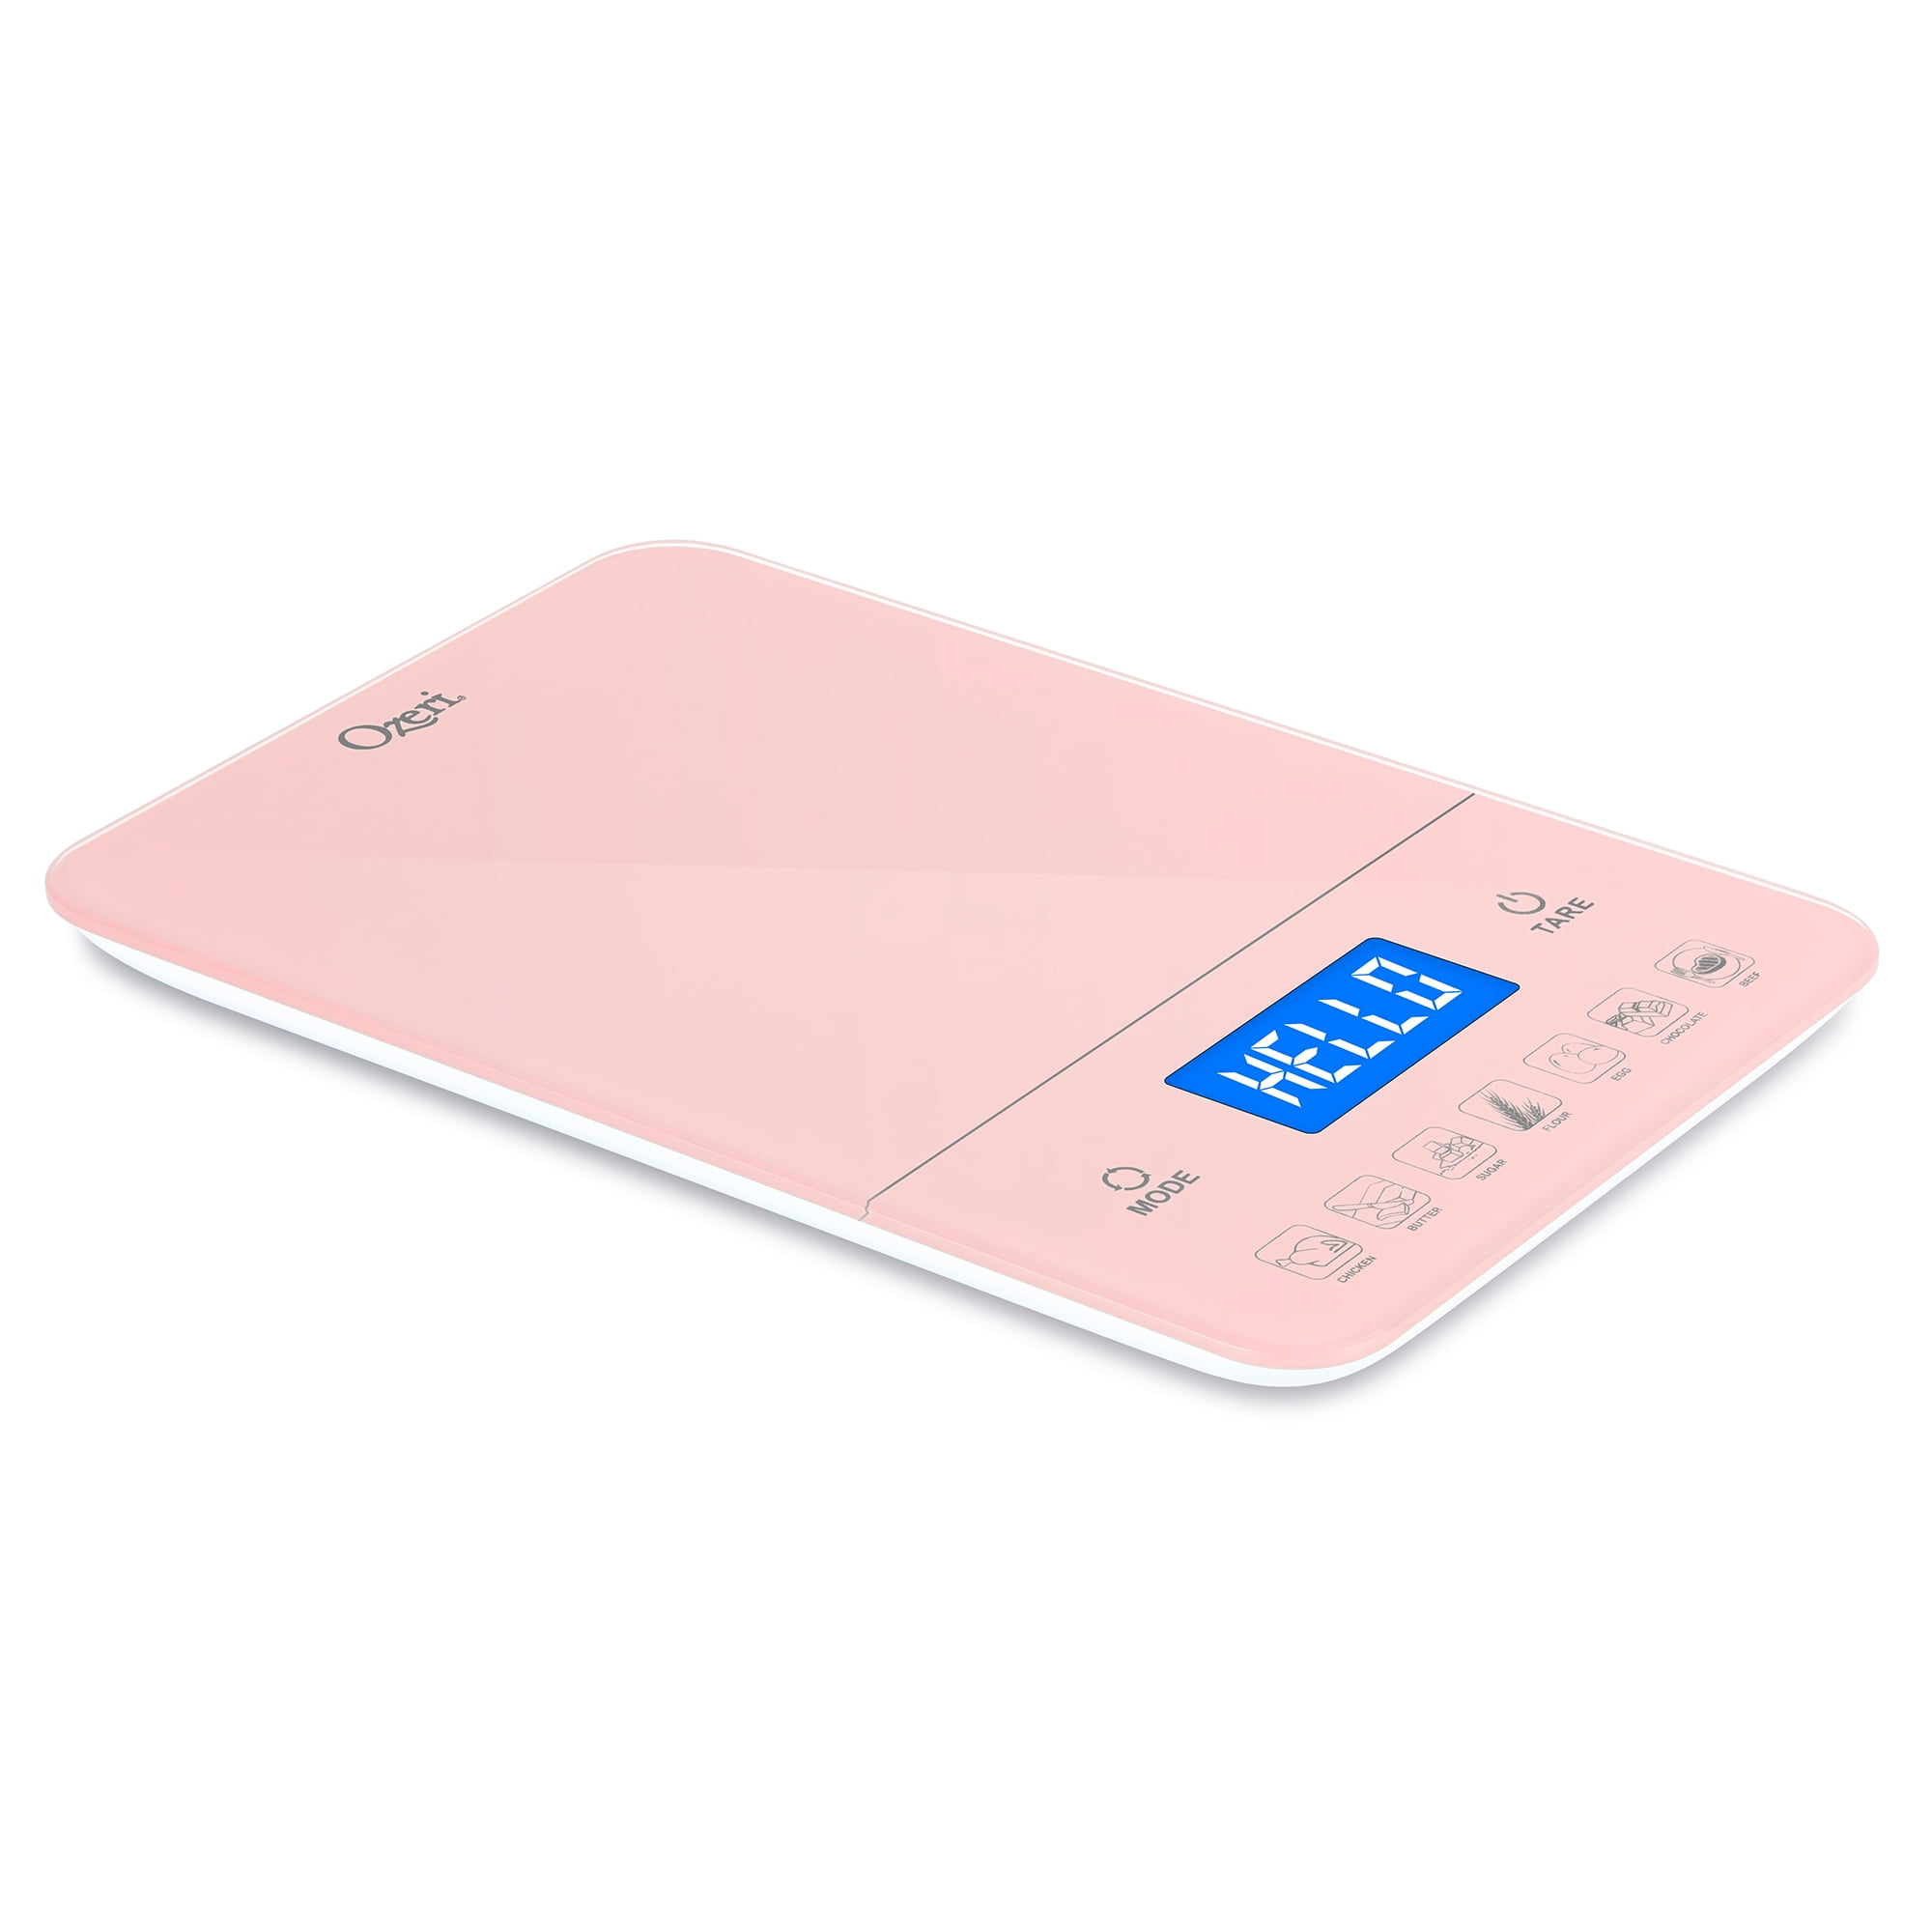 Ozeri Touch III 22 lbs (10 kg) Kitchen Scale in Tempered Glass